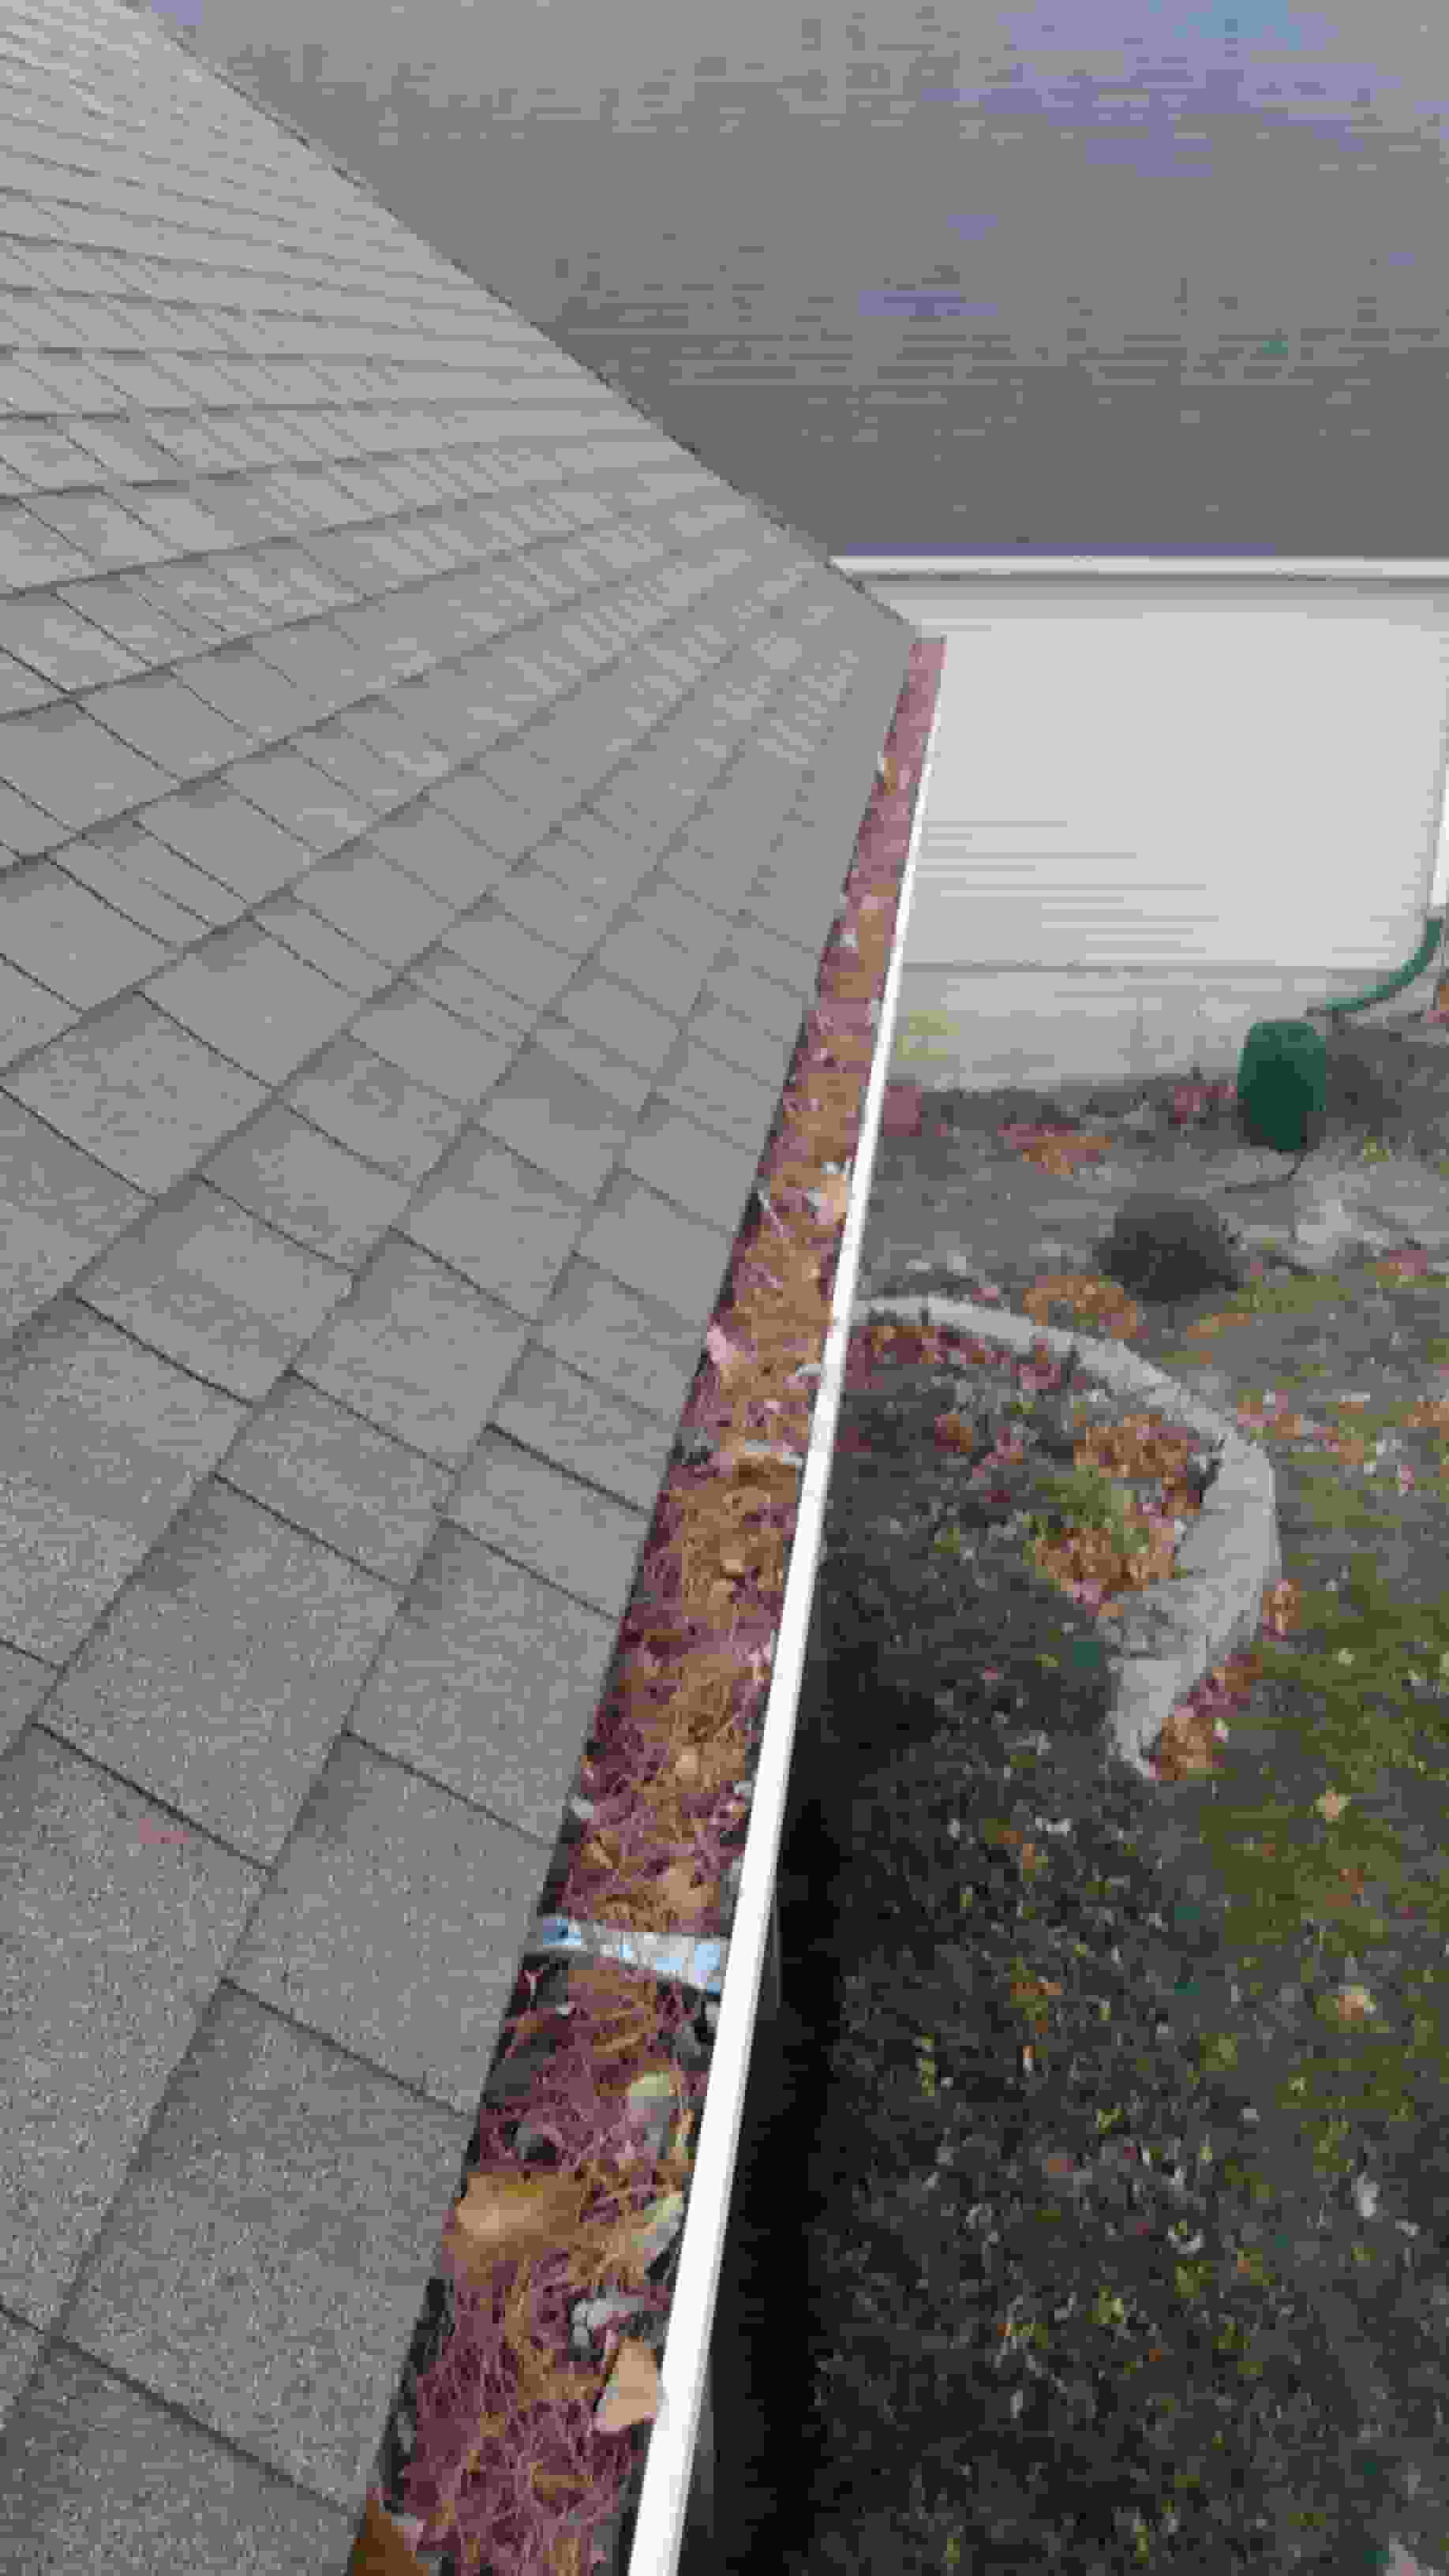 how to clean your gutters safely